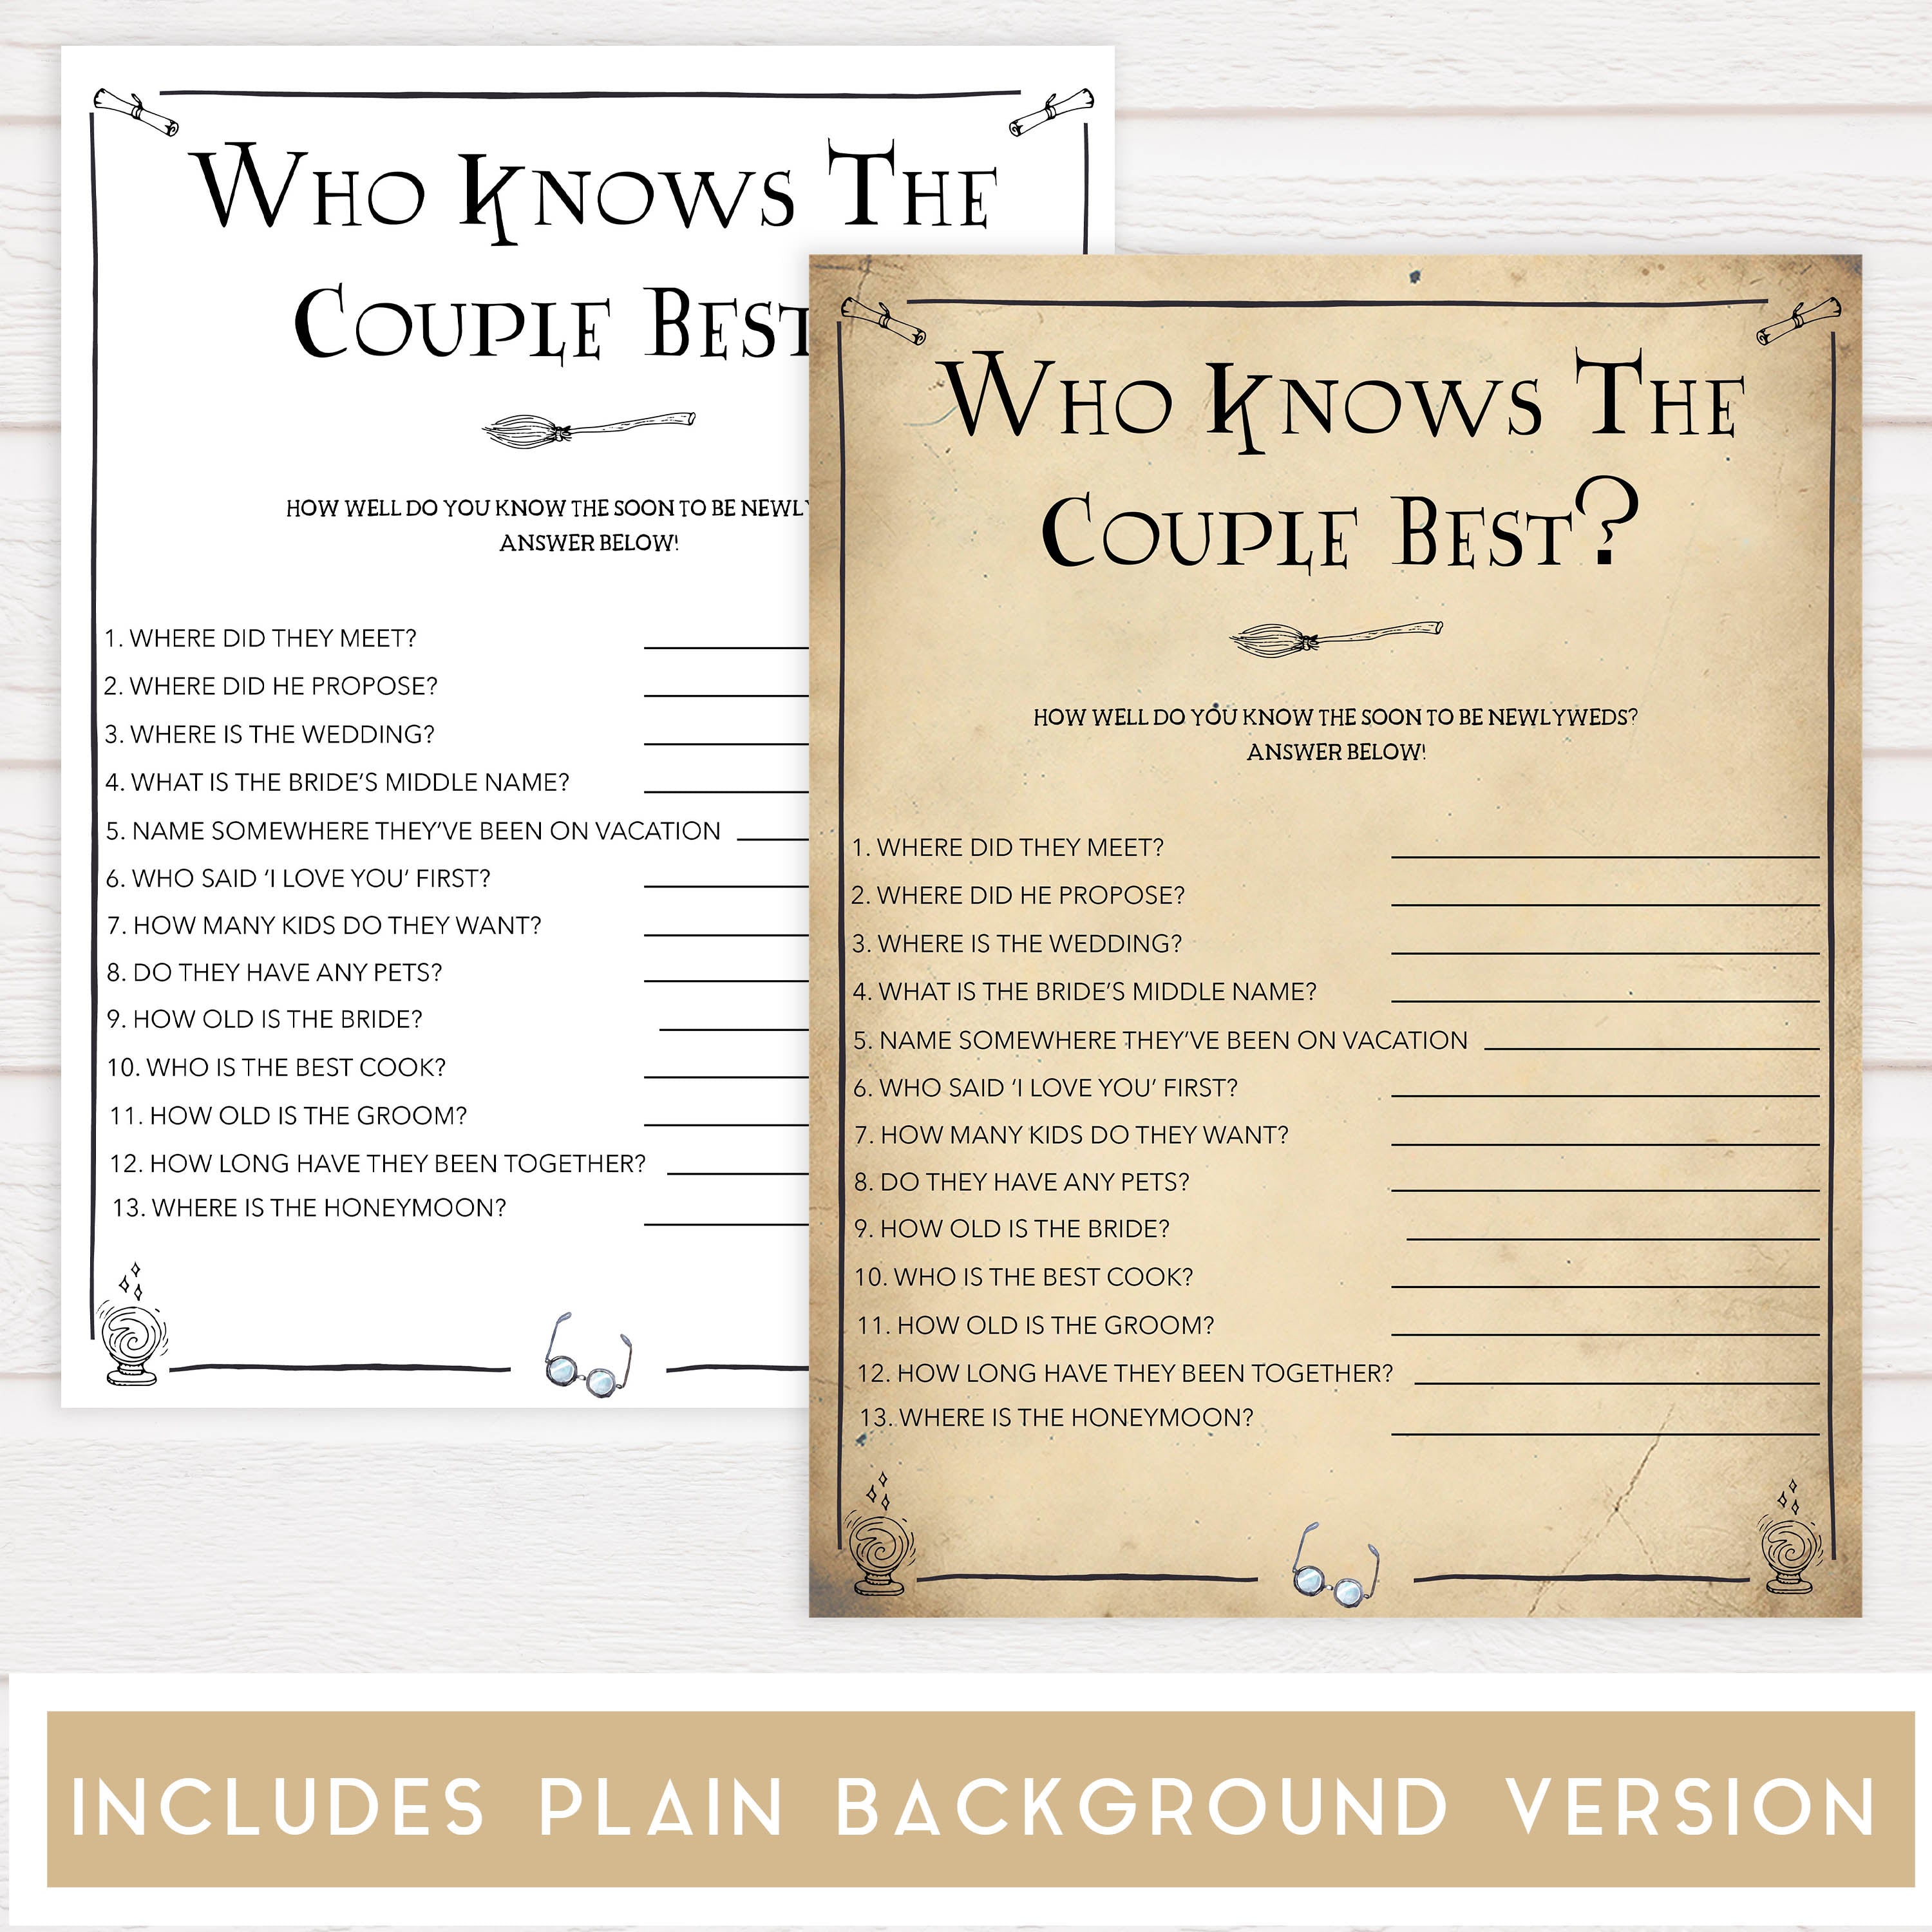 who knows the couple best game, bridal who knows the couple best,  Printable bridal shower games, Harry potter bridal shower, Harry Potter bridal shower games, fun bridal shower games, bridal shower game ideas, Harry Potter bridal shower